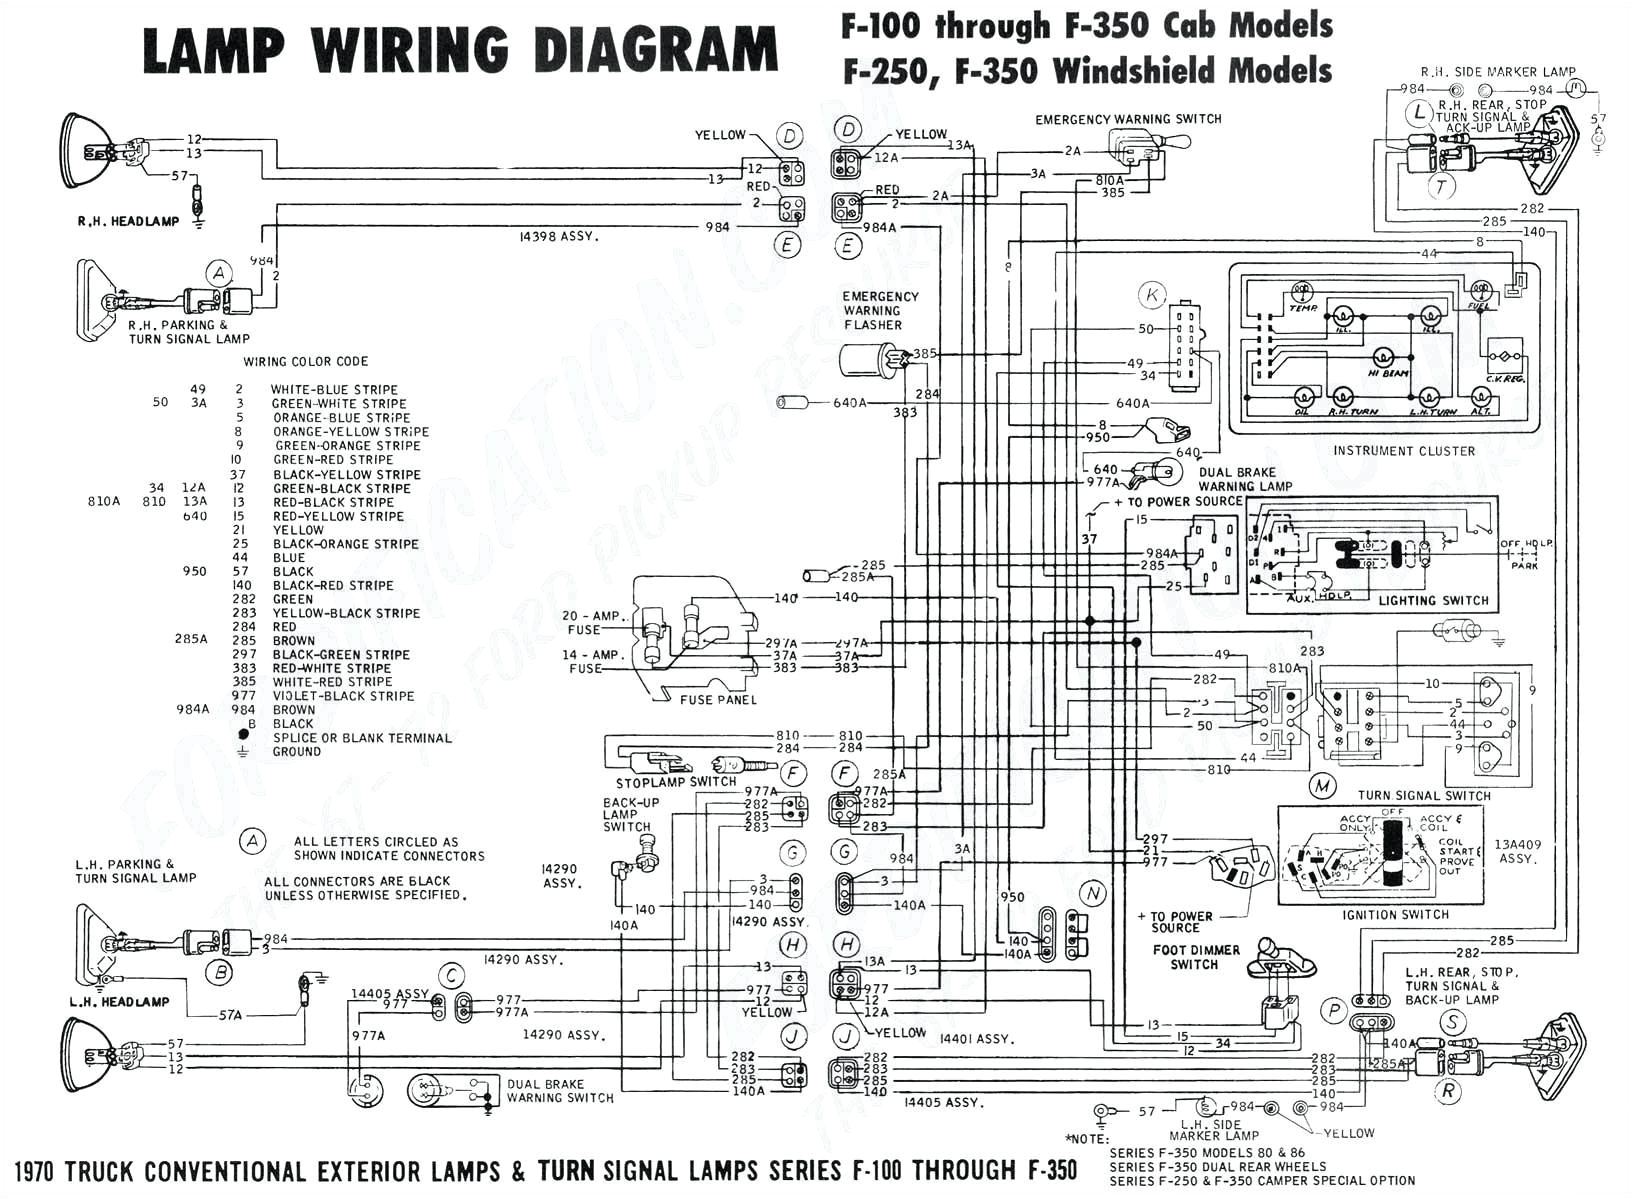 electric space heater wiring diagram awesome 3 phase schematics diagrams e280a2 all autometer tach